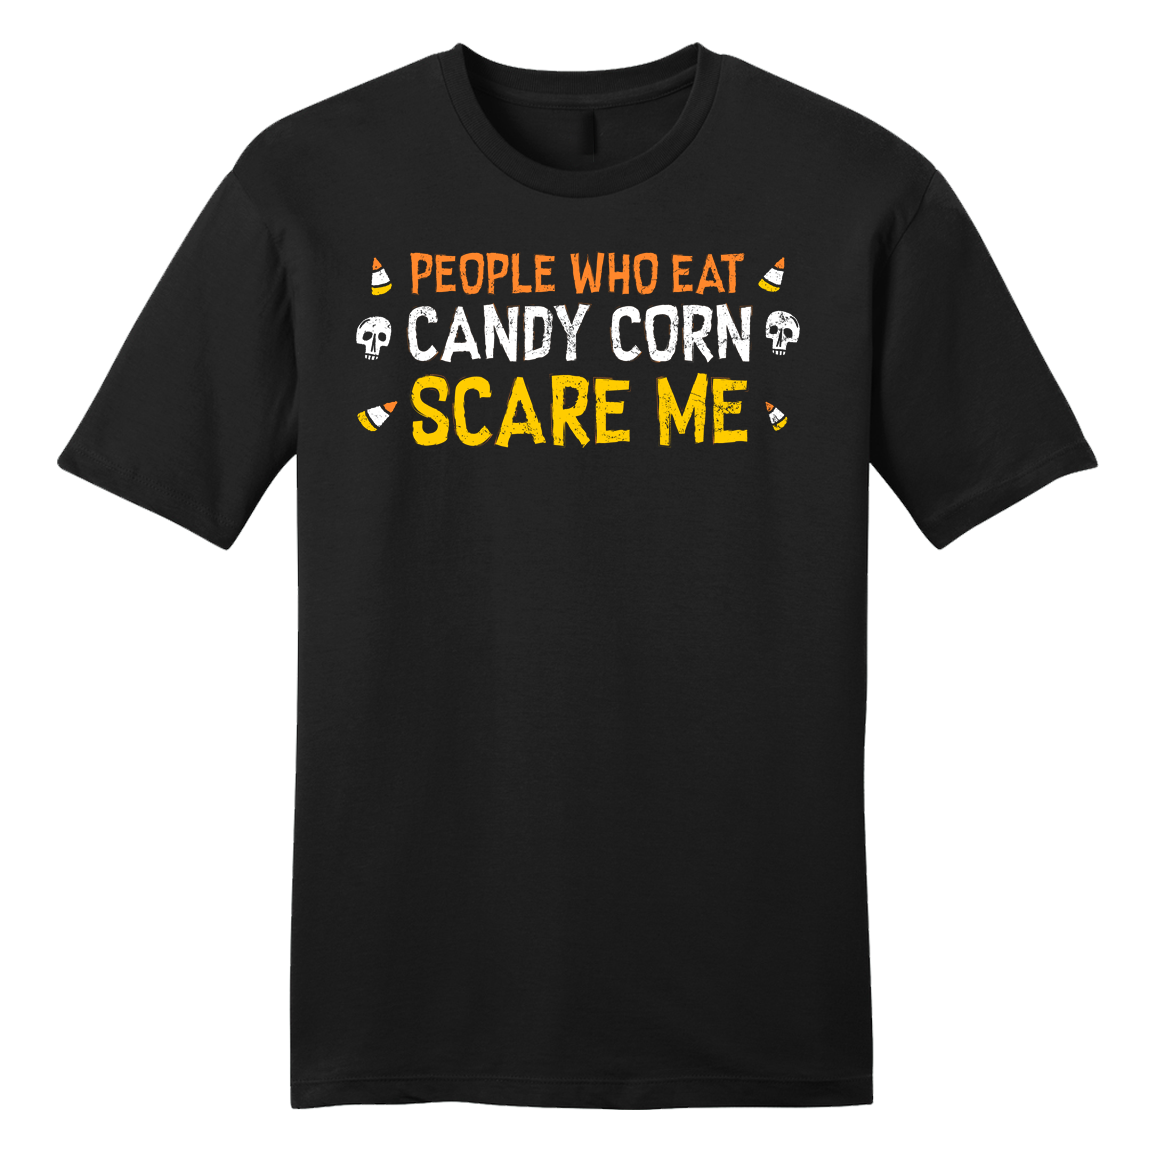 People Who Eat Candy Corn Scare Me tee